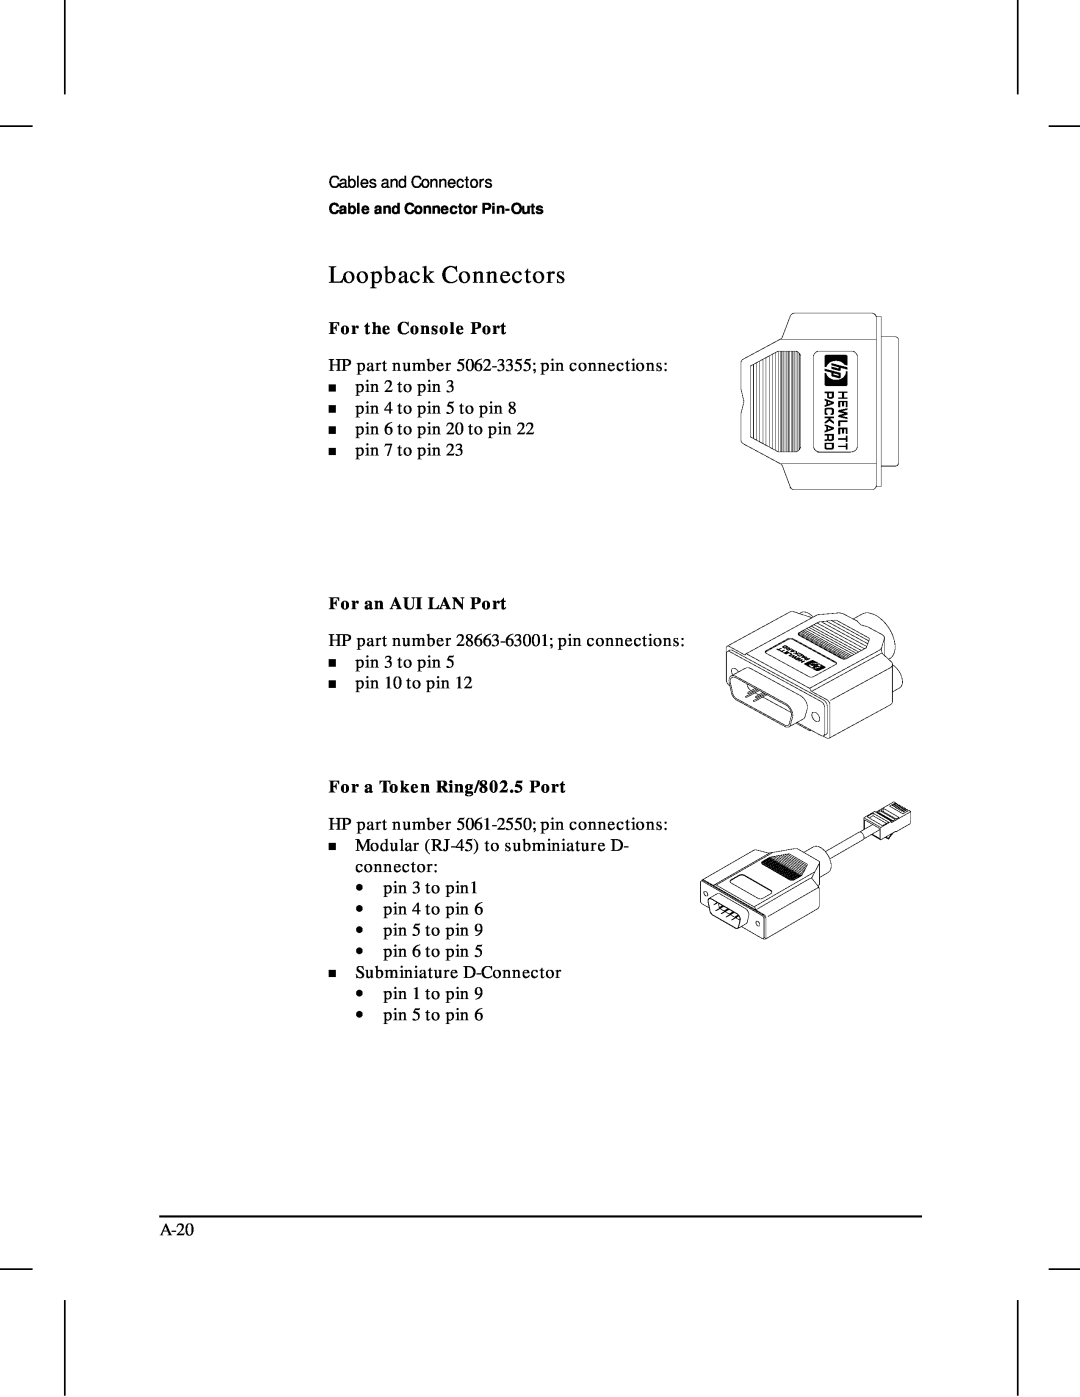 HP 480 manual Loopback Connectors, Cable and Connector Pin-Outs, For the Console Port, For an AUI LAN Port 